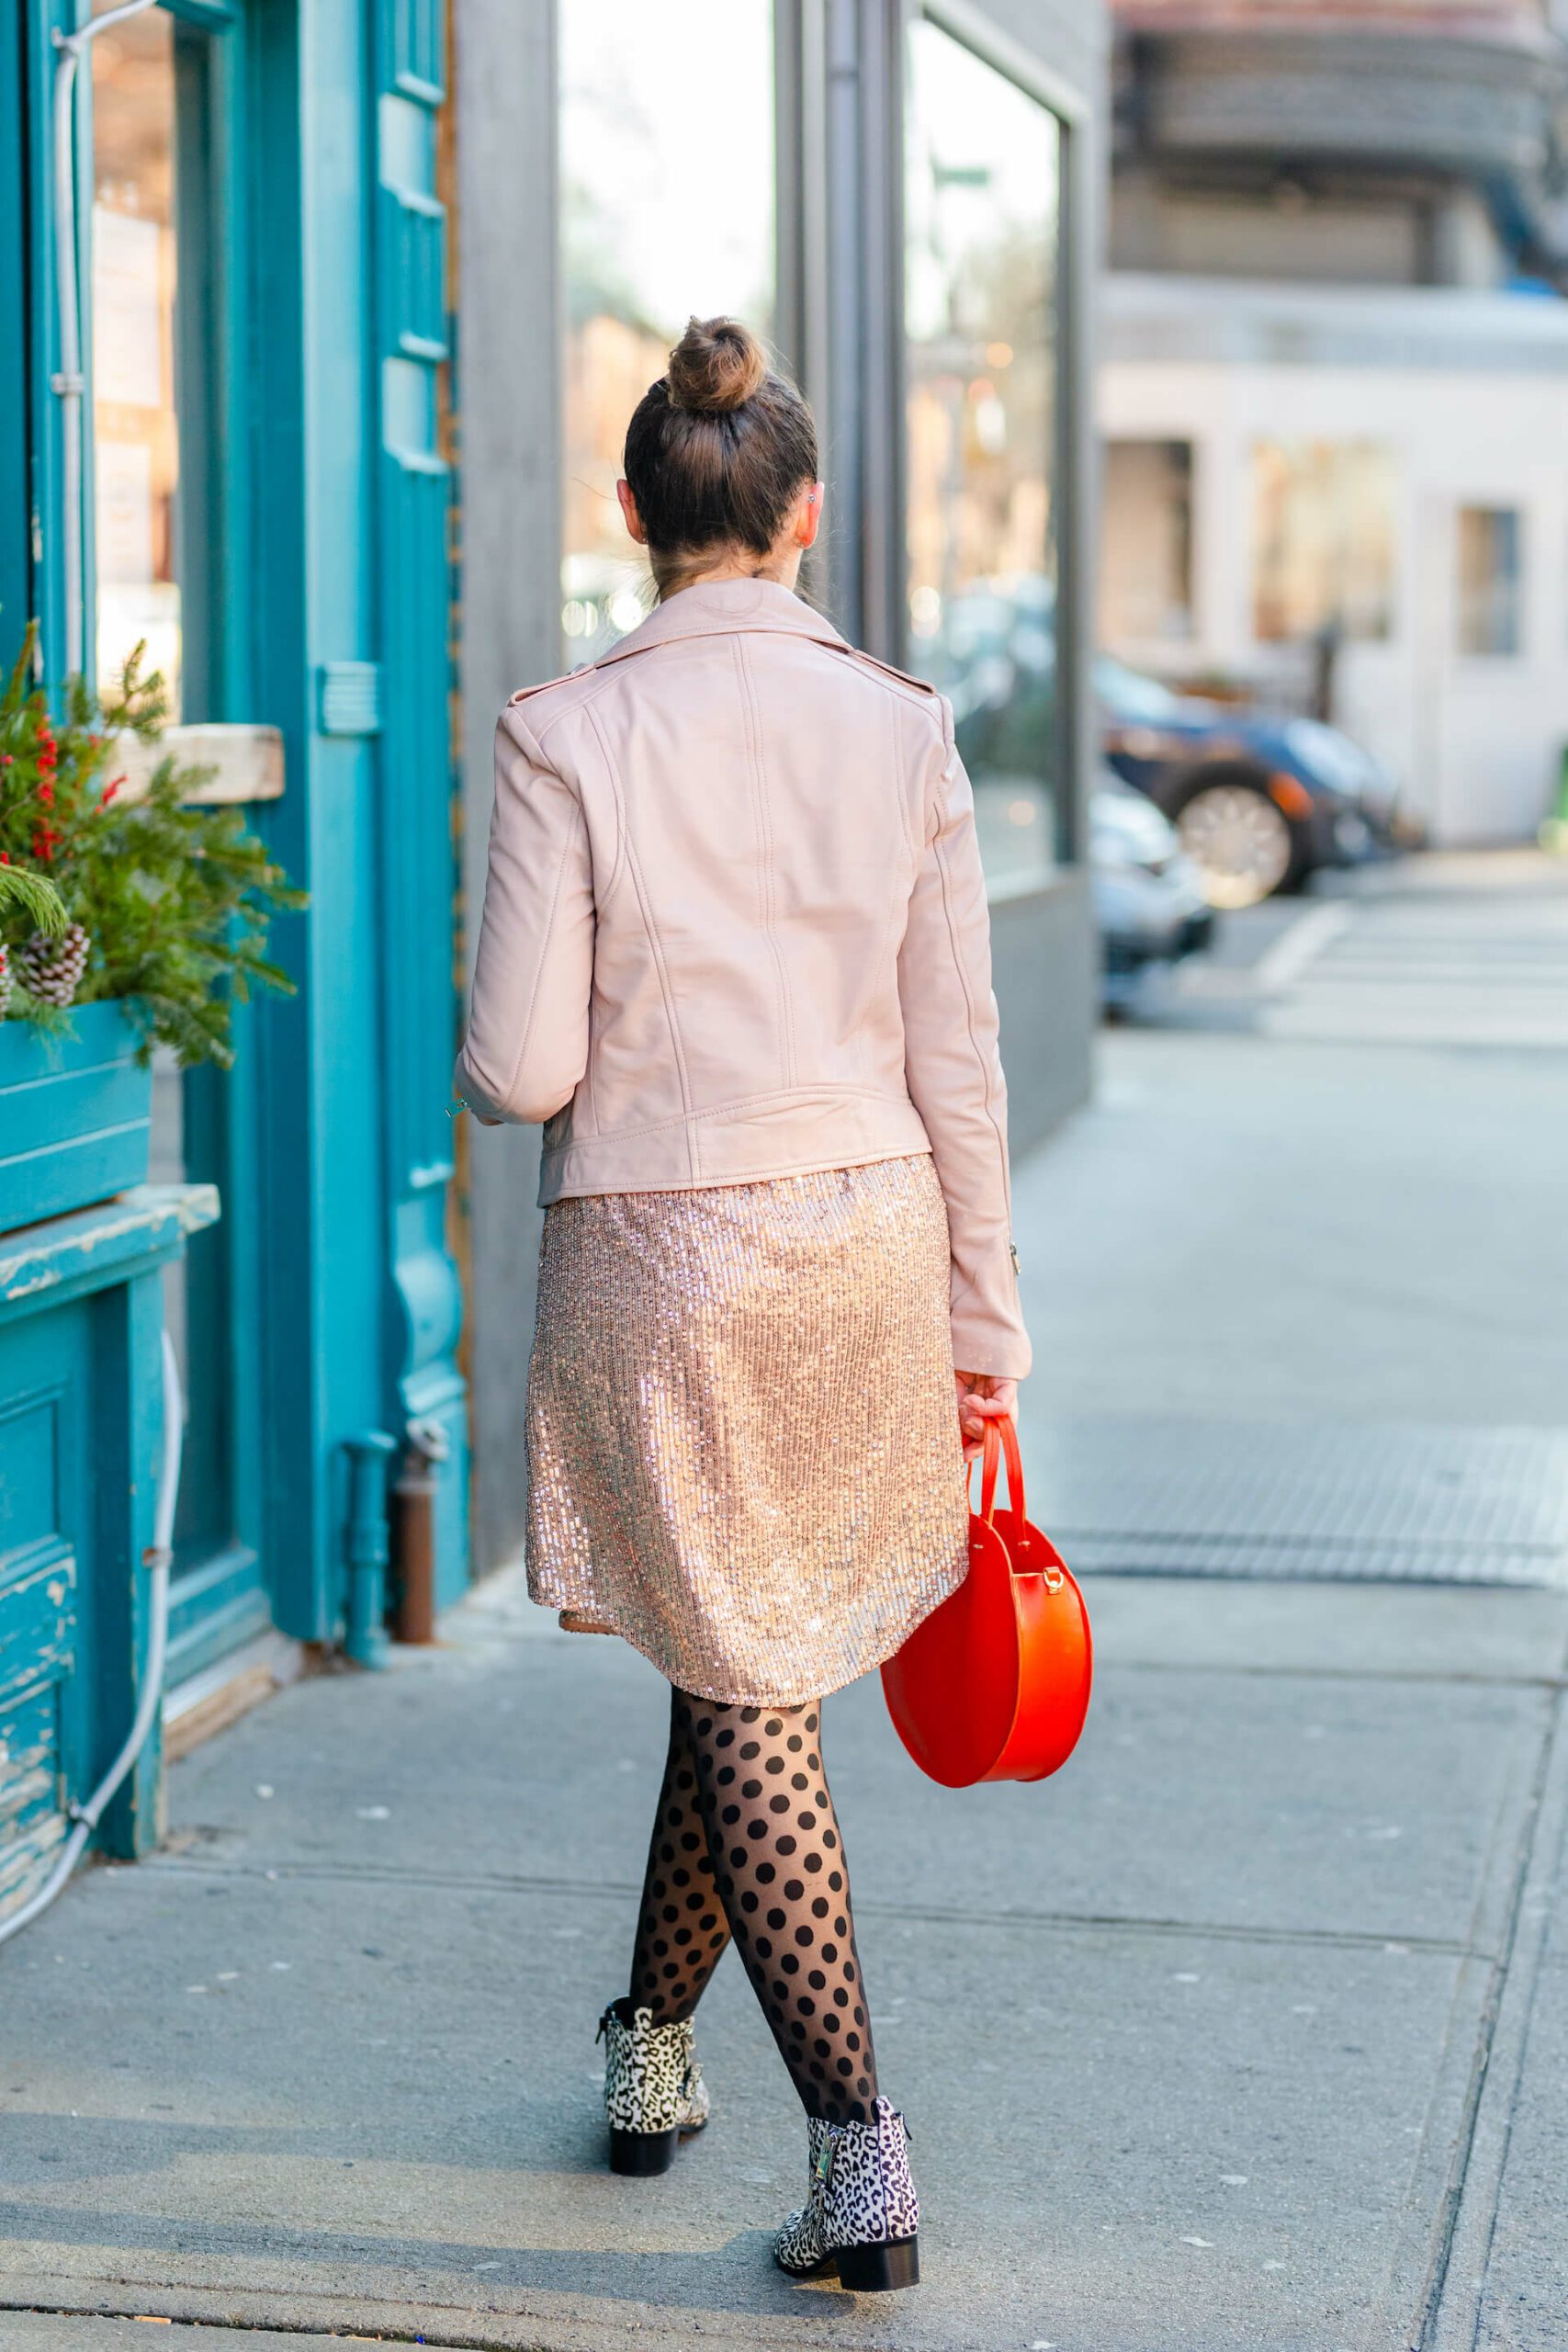 Anthro Sparkly Dress Lamarque Leather Jacket Mark Fisher Booties NYE Look by Modnitsa Styling